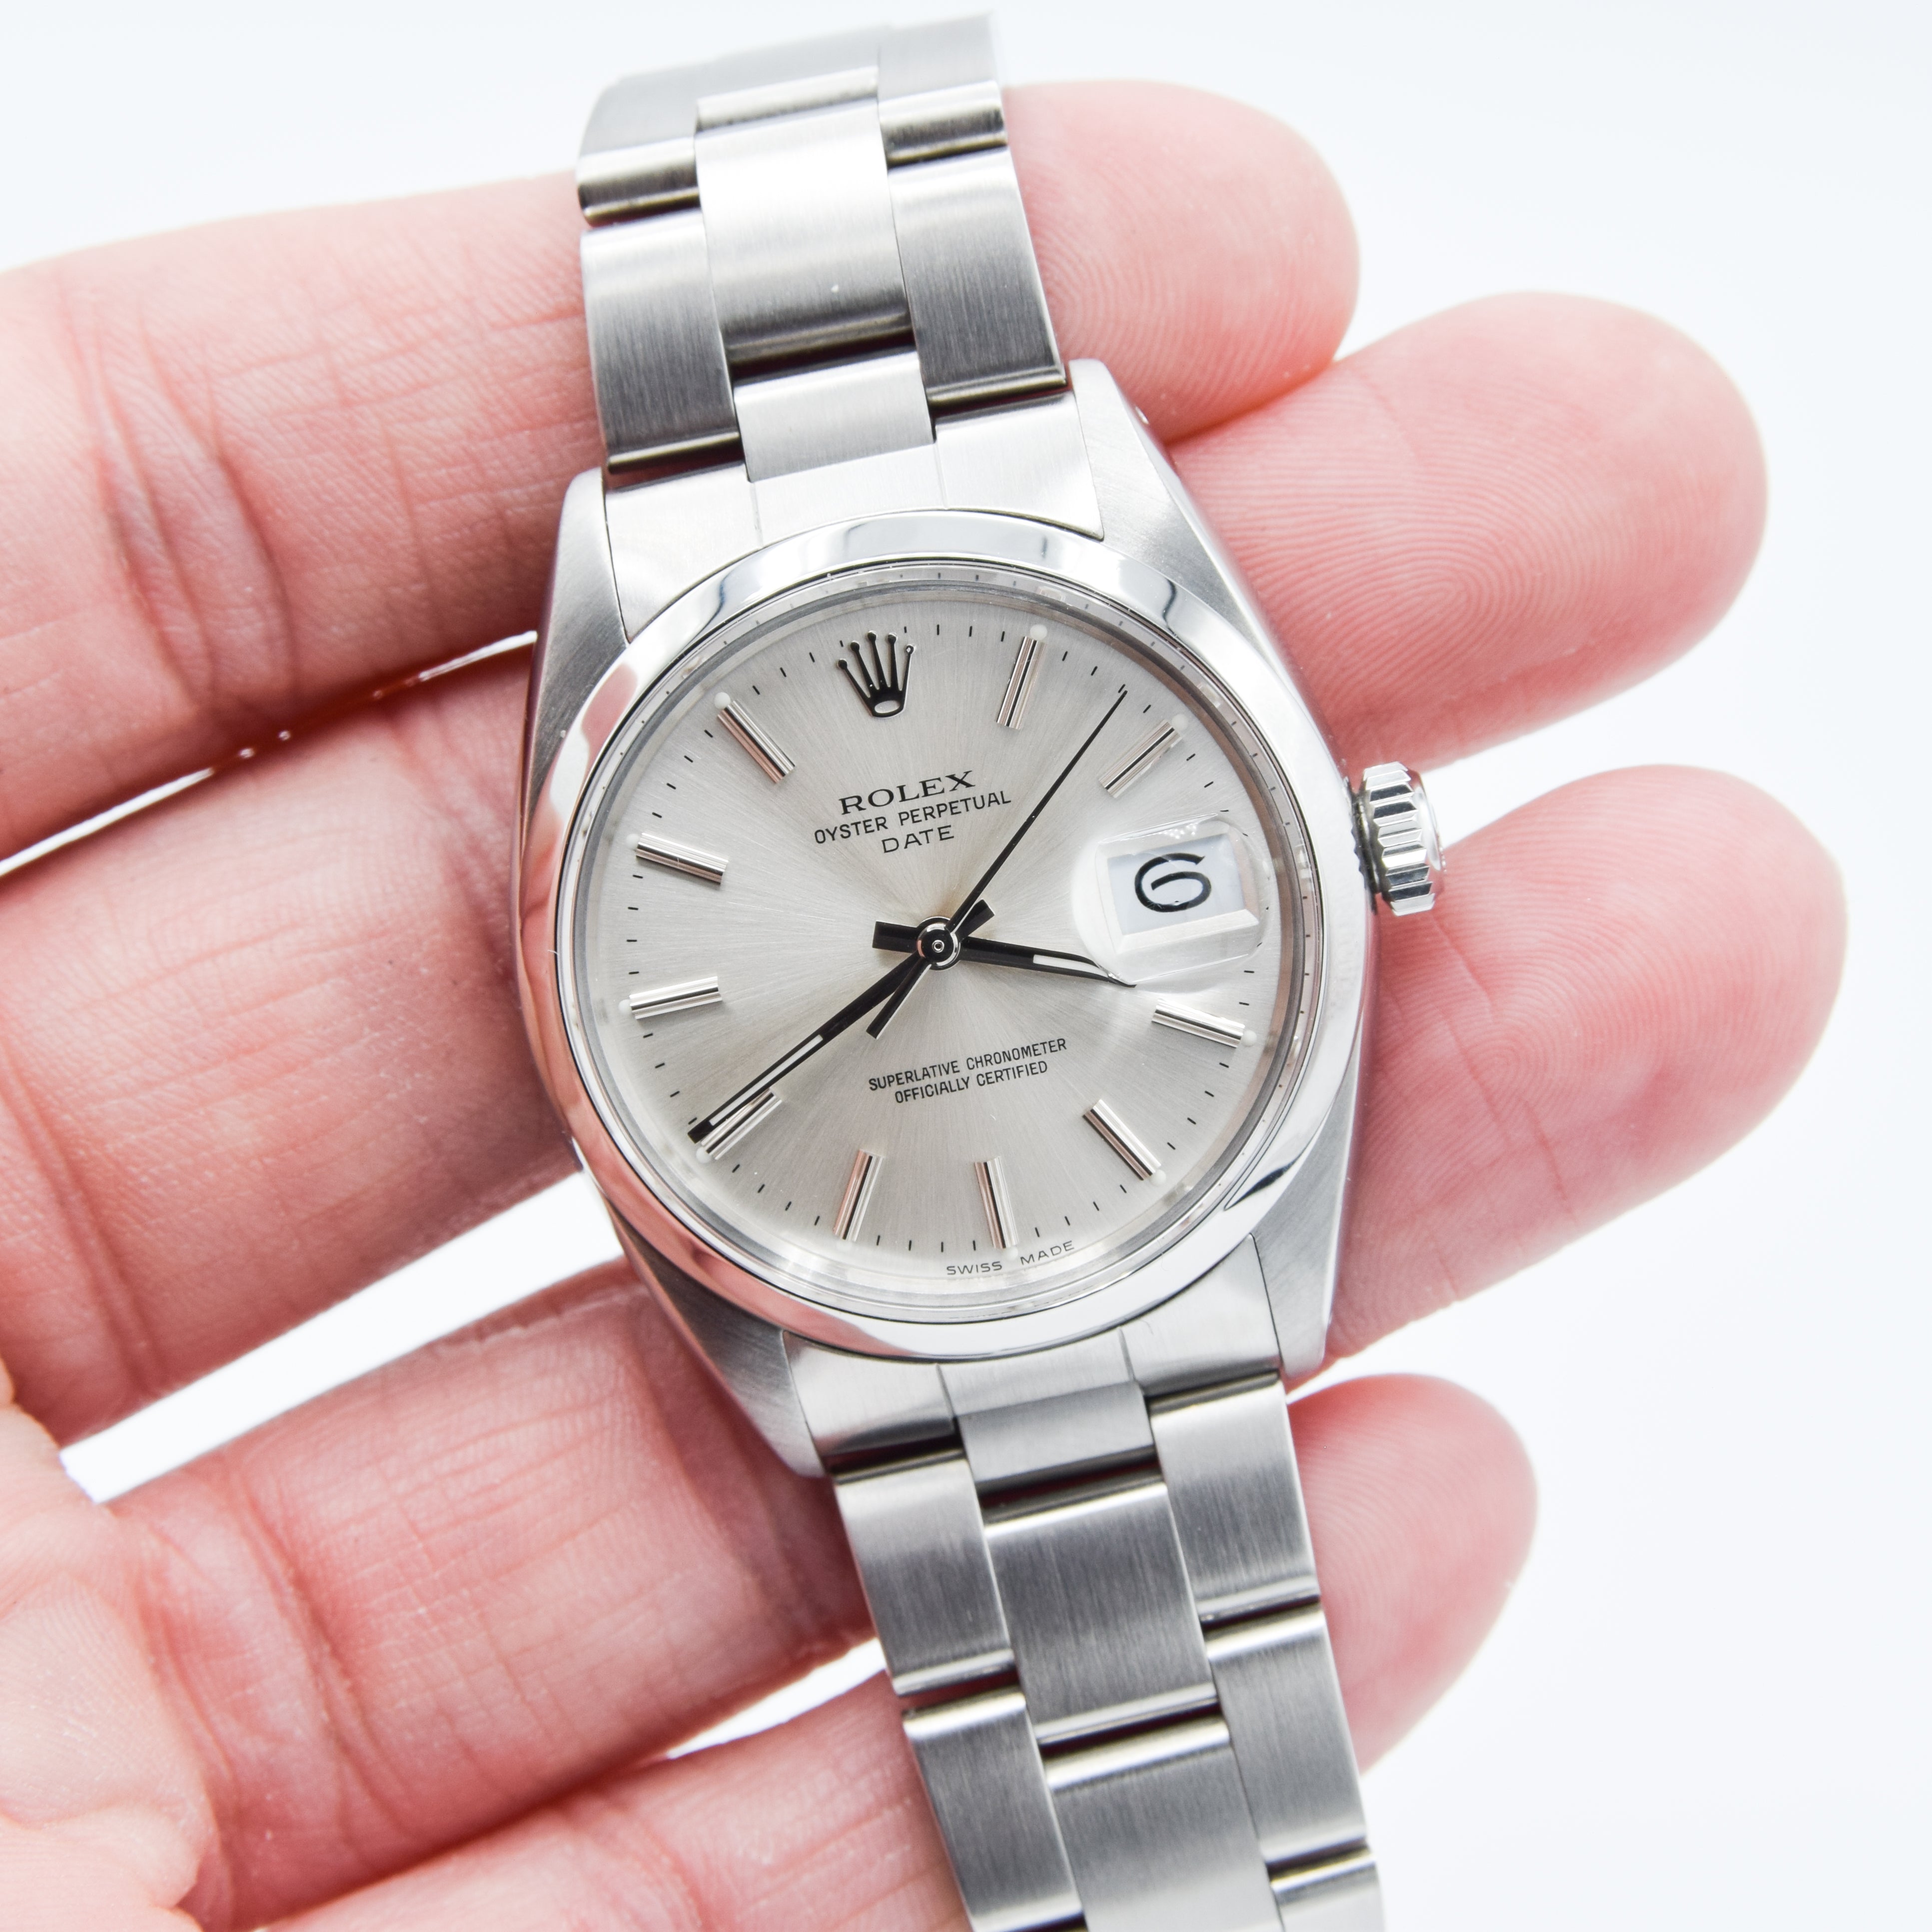 1965 Rolex Perpetual Date Model 1500 with Dial in Stai | Antique Watch Co